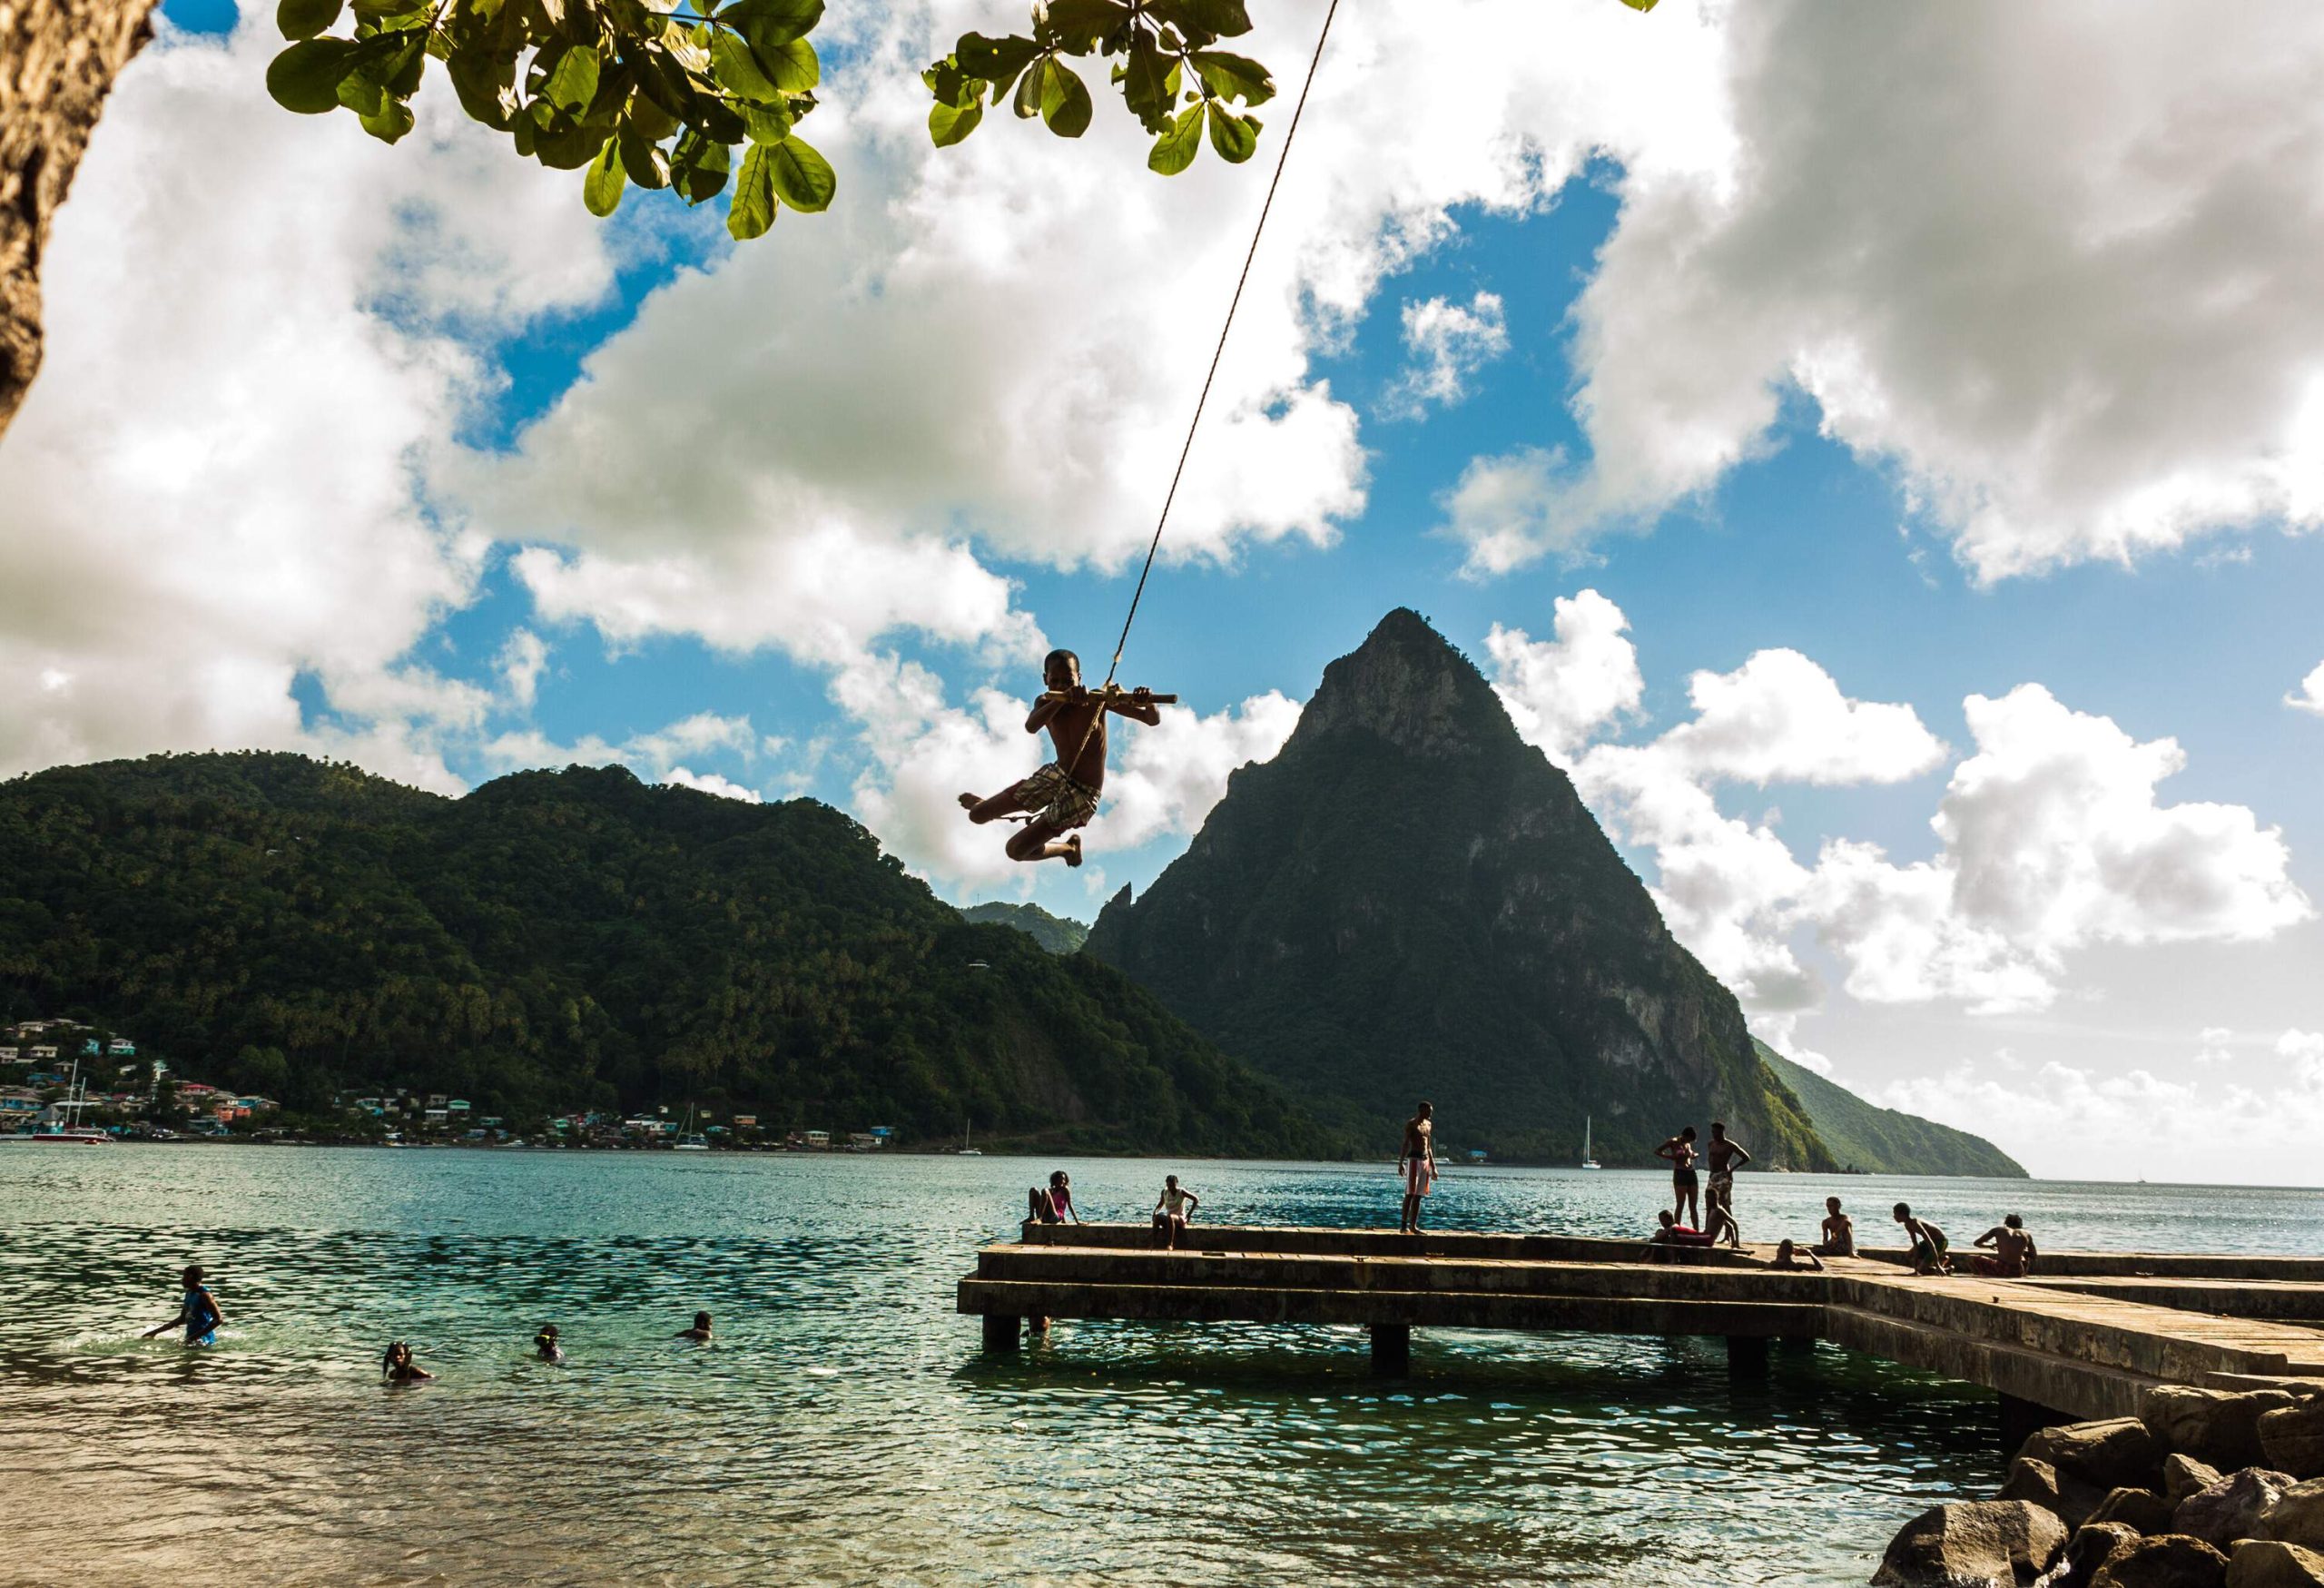 A person jumps from a rope swing into the water as a group of people watch from a concrete pier.